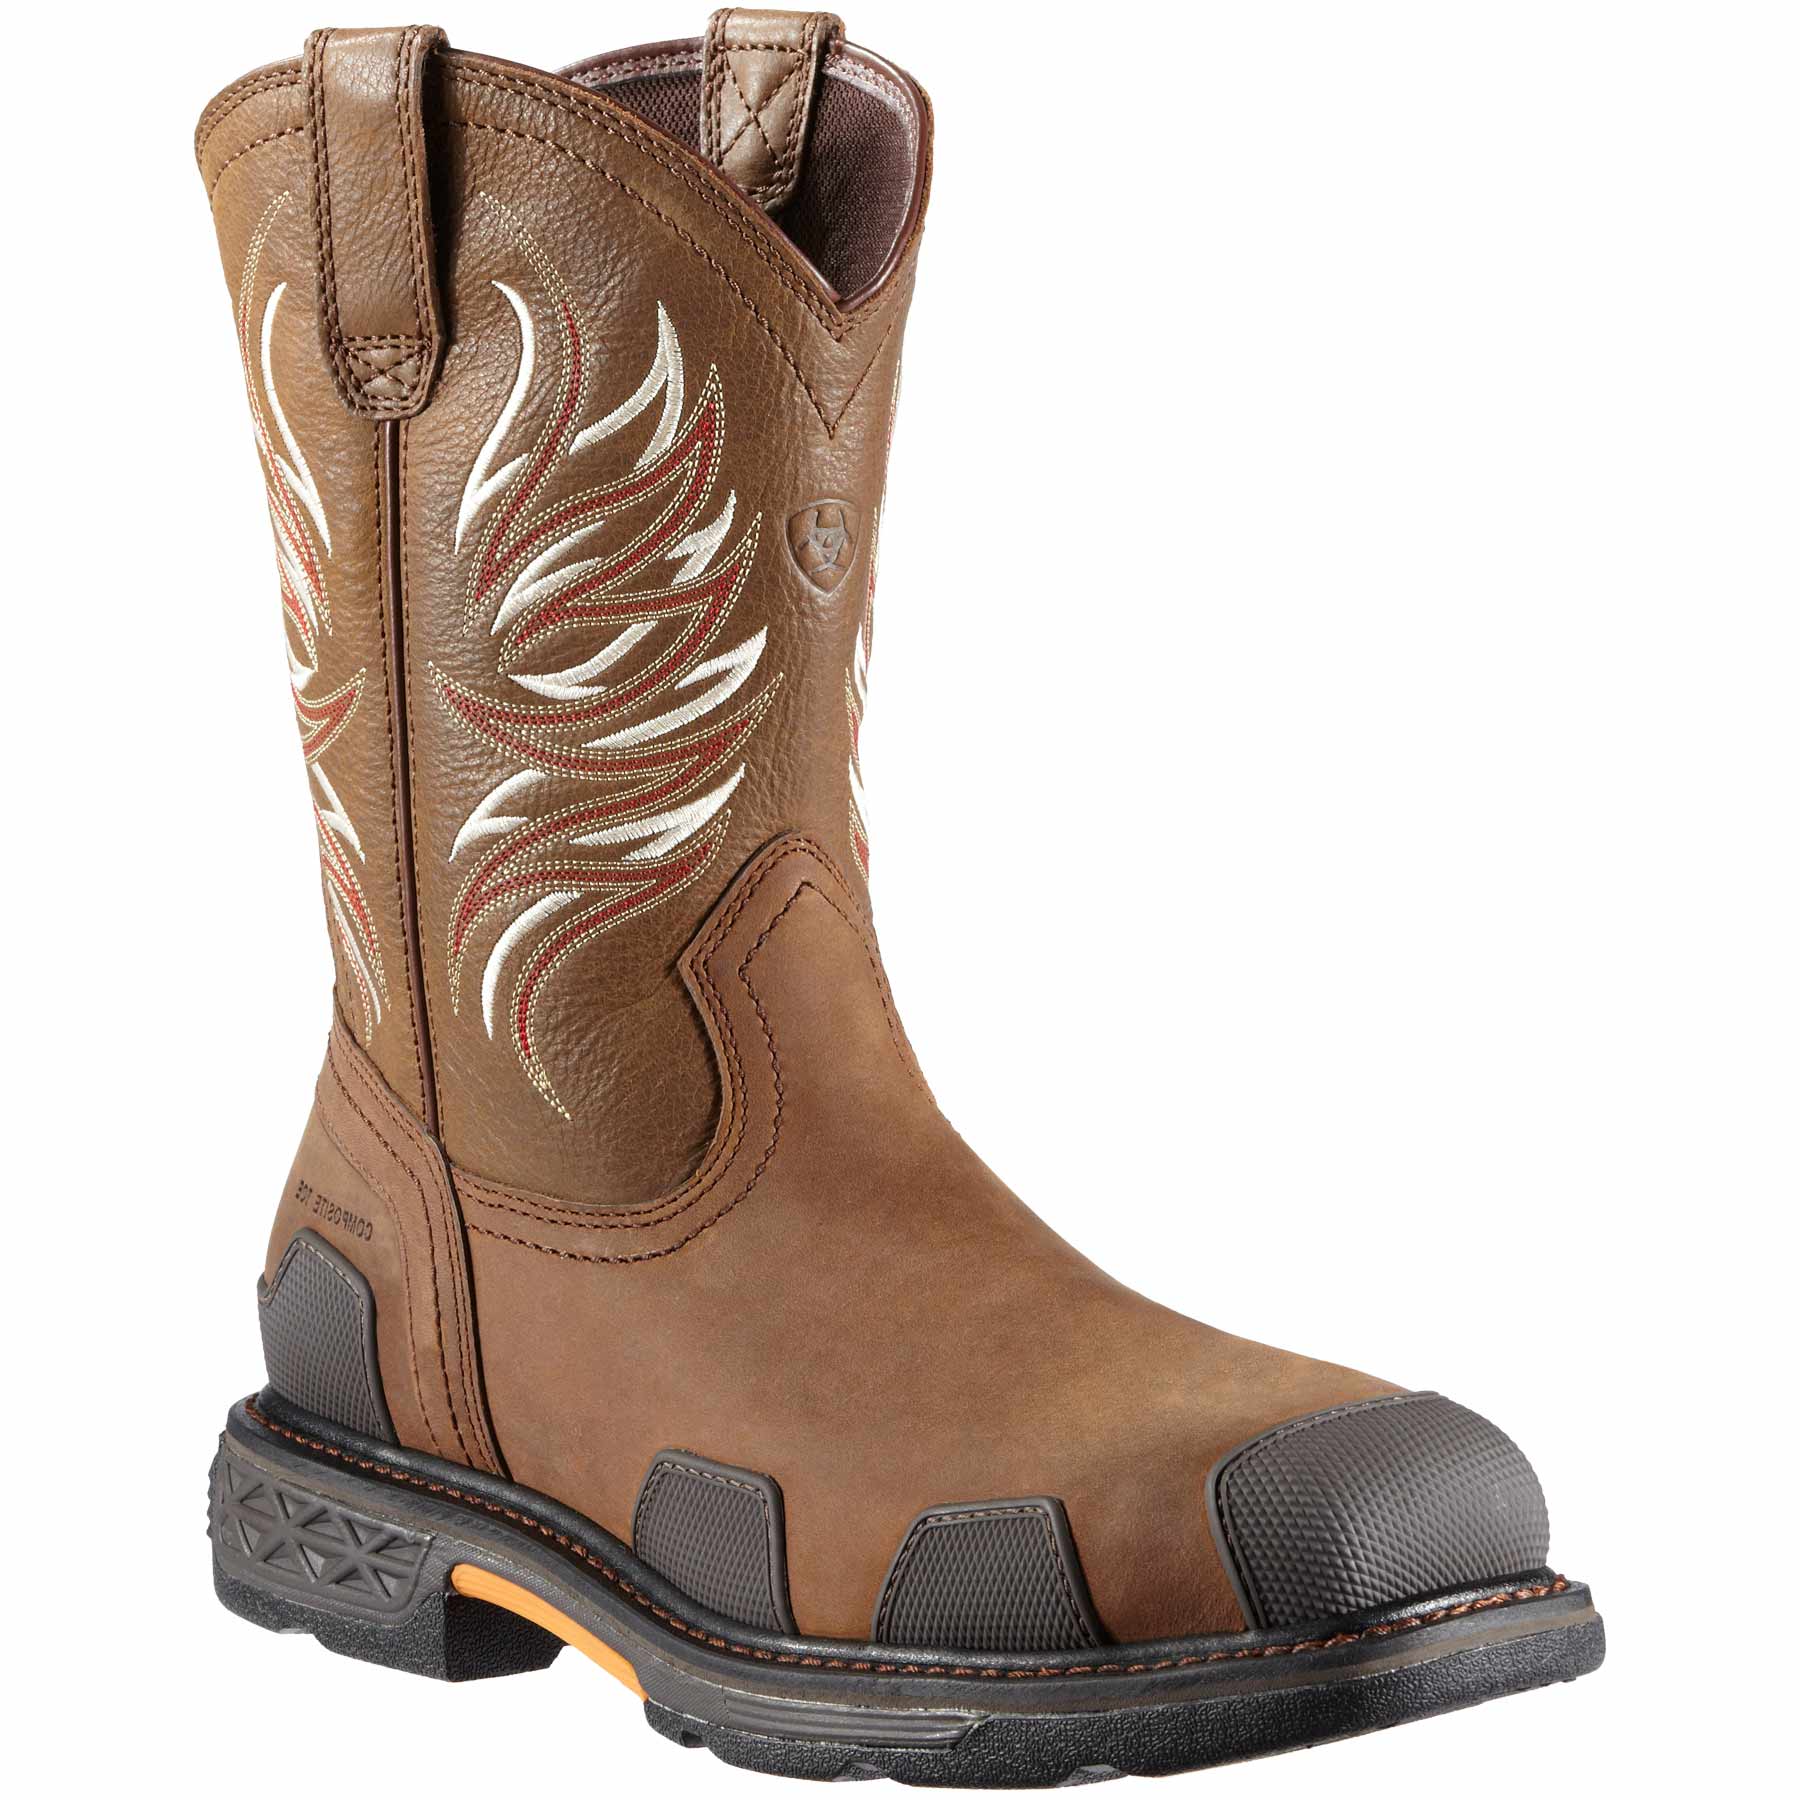 Ariat Men's Work Boots Overdrive Wide Square Toe in Alamo Brown.